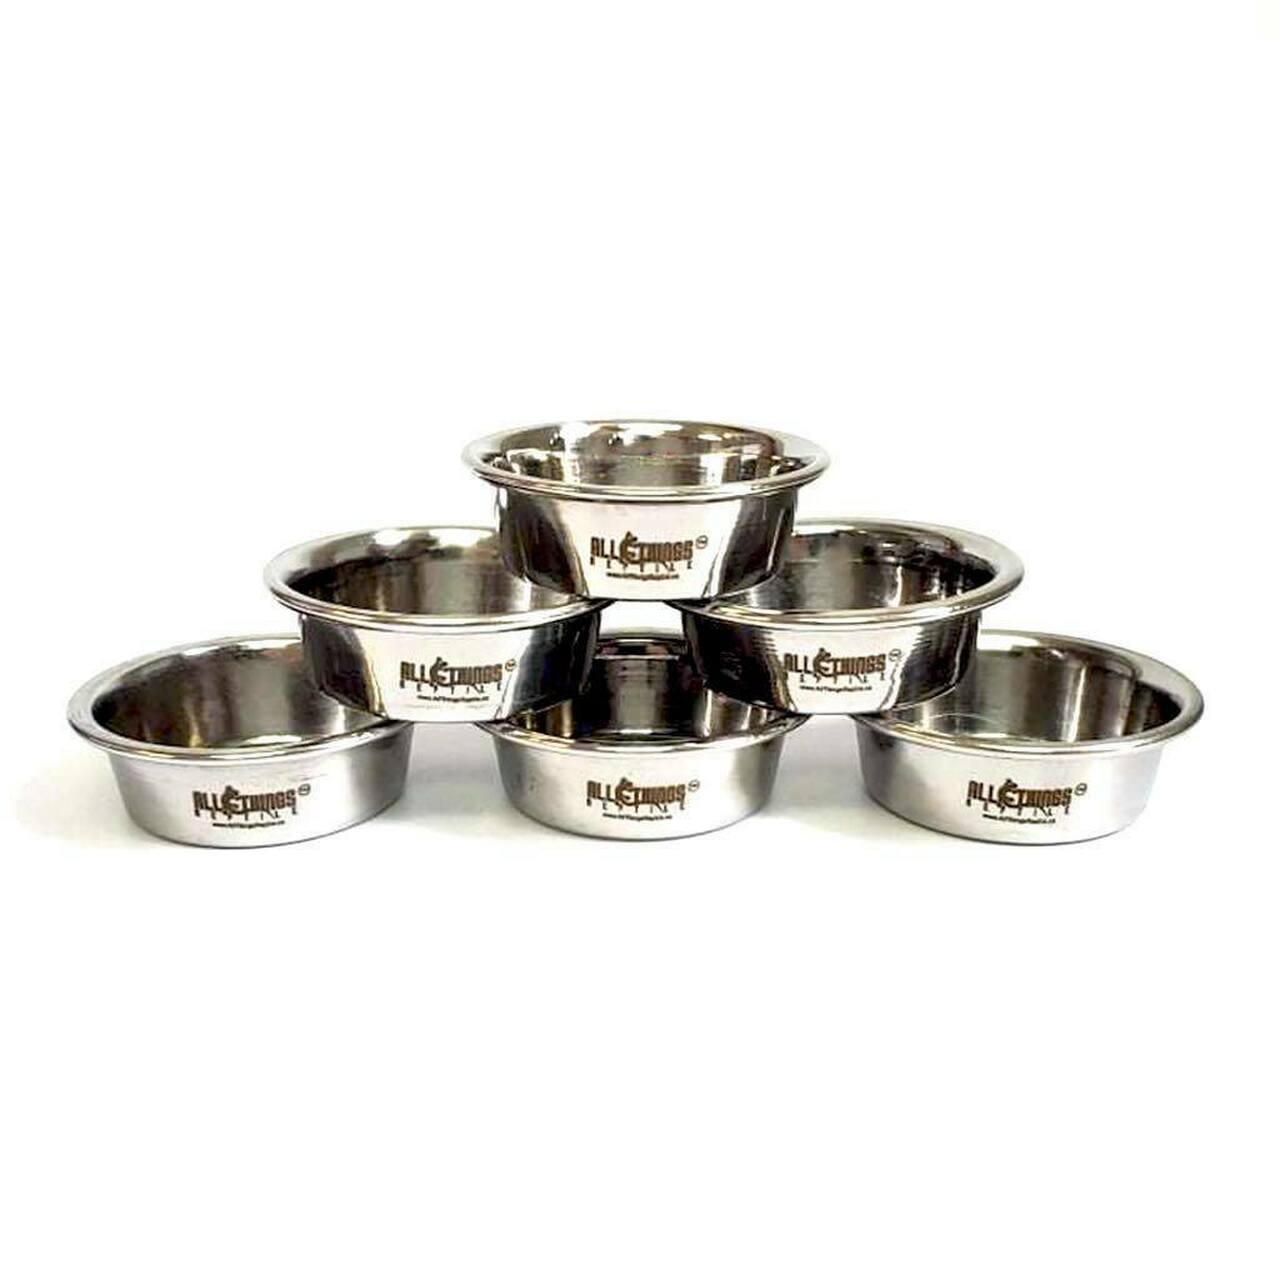 ATR Stainless Steel Feeding Cups/Dishes (0.5oz SMALL) - 1 pc